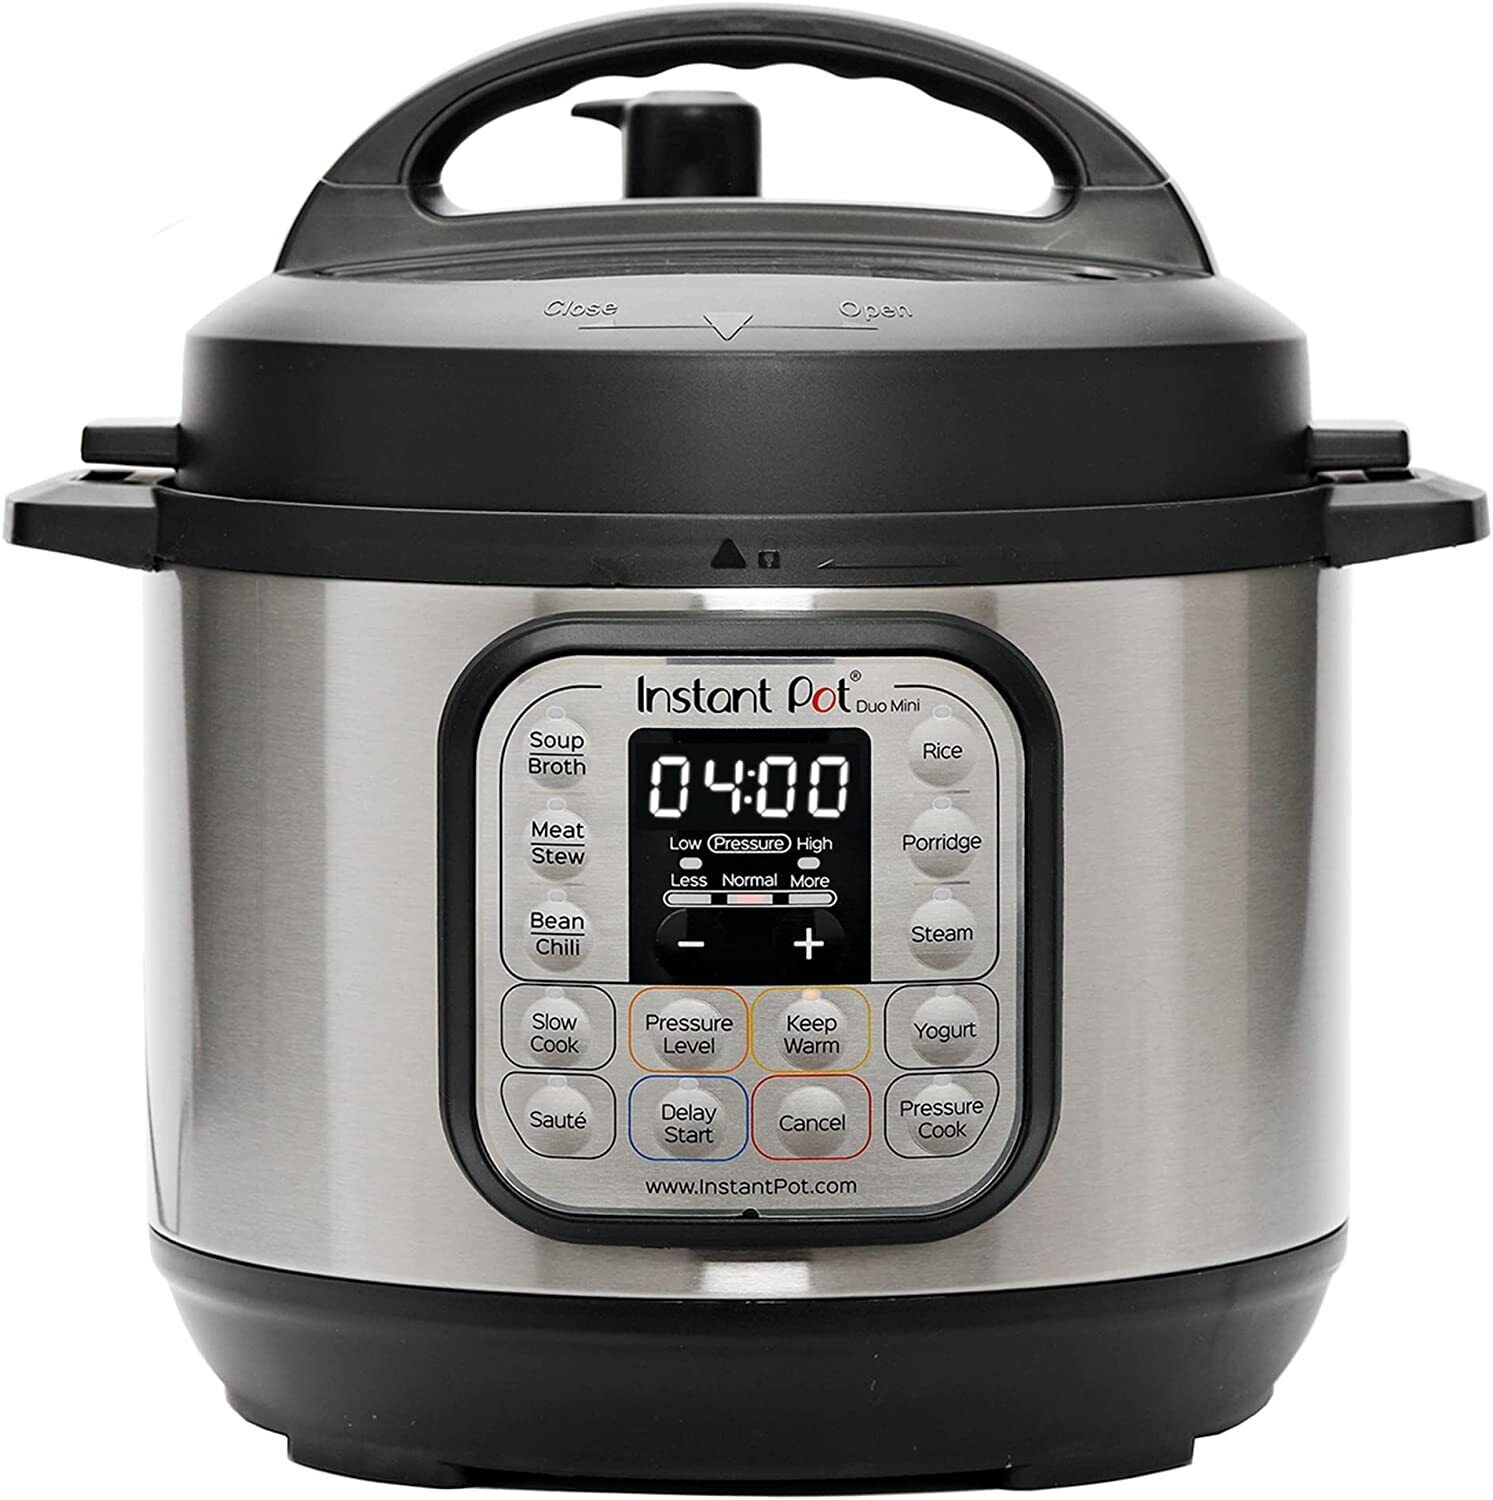 Instant Pot Duo 7-in-1 Electric Pressure Cooker Slow Cooker 